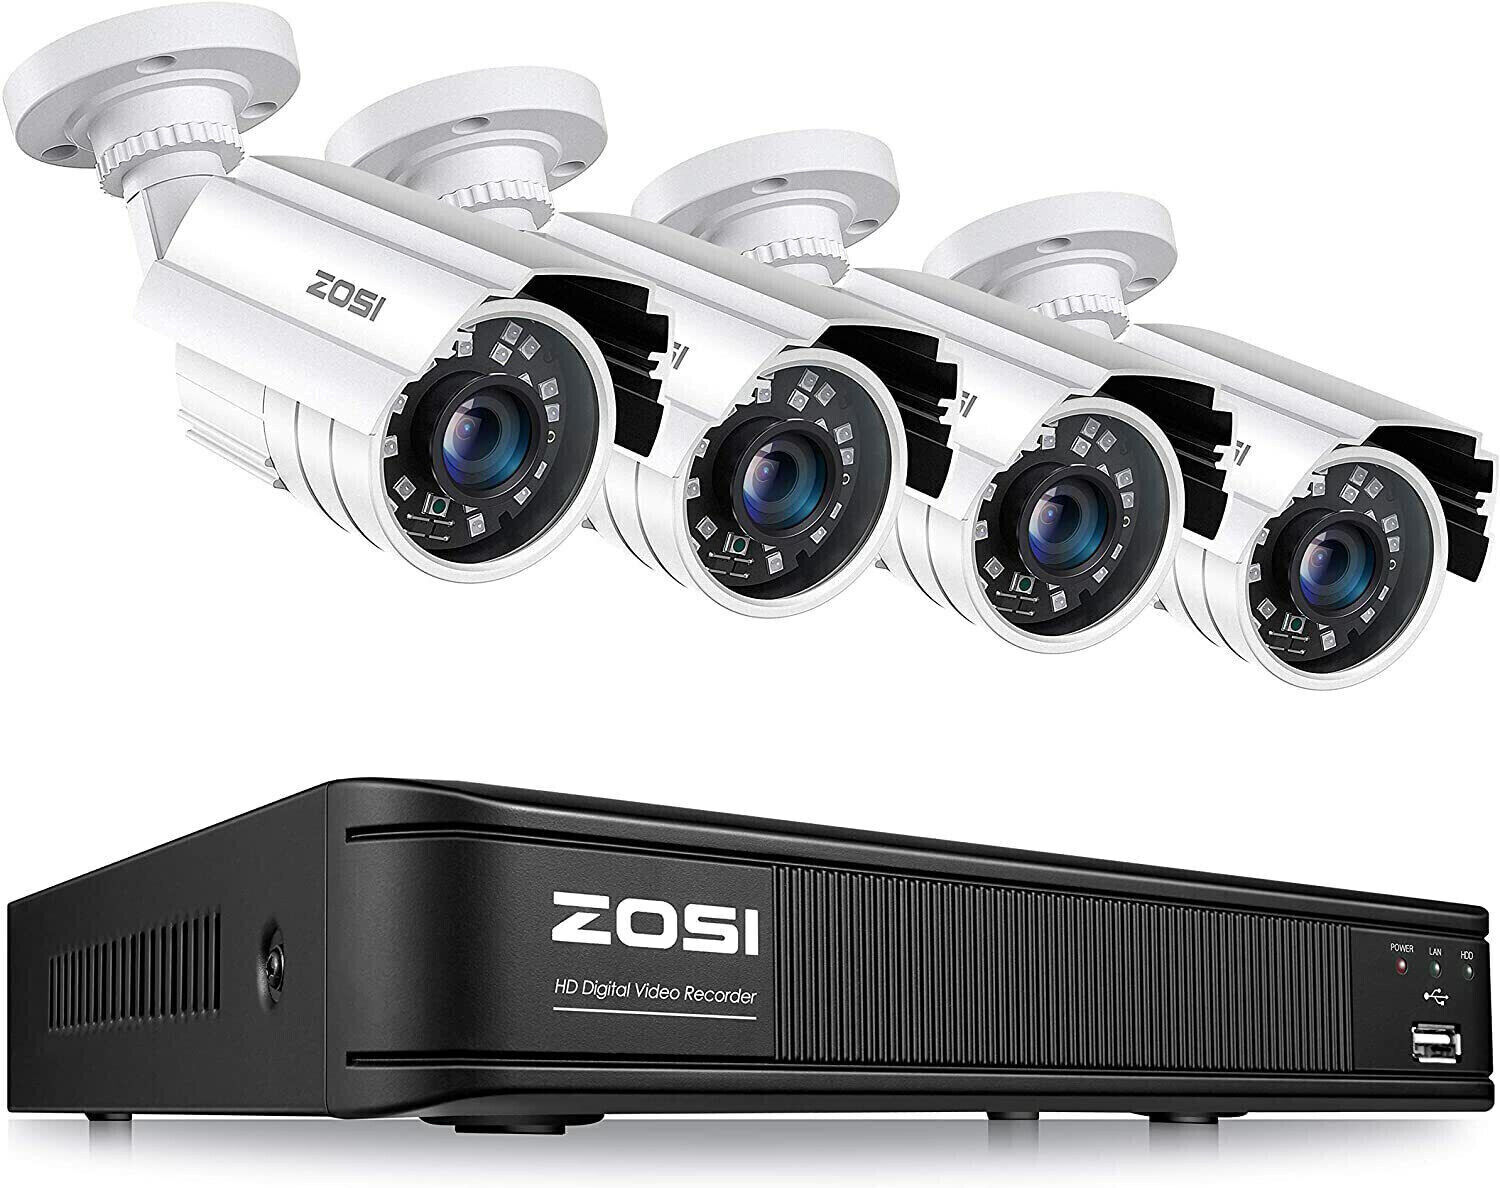 ZOSI CCTV 8CH DVR Home Security Camera System 1080p Outdoor Cameras Night Vision ZOSI Does Not Apply